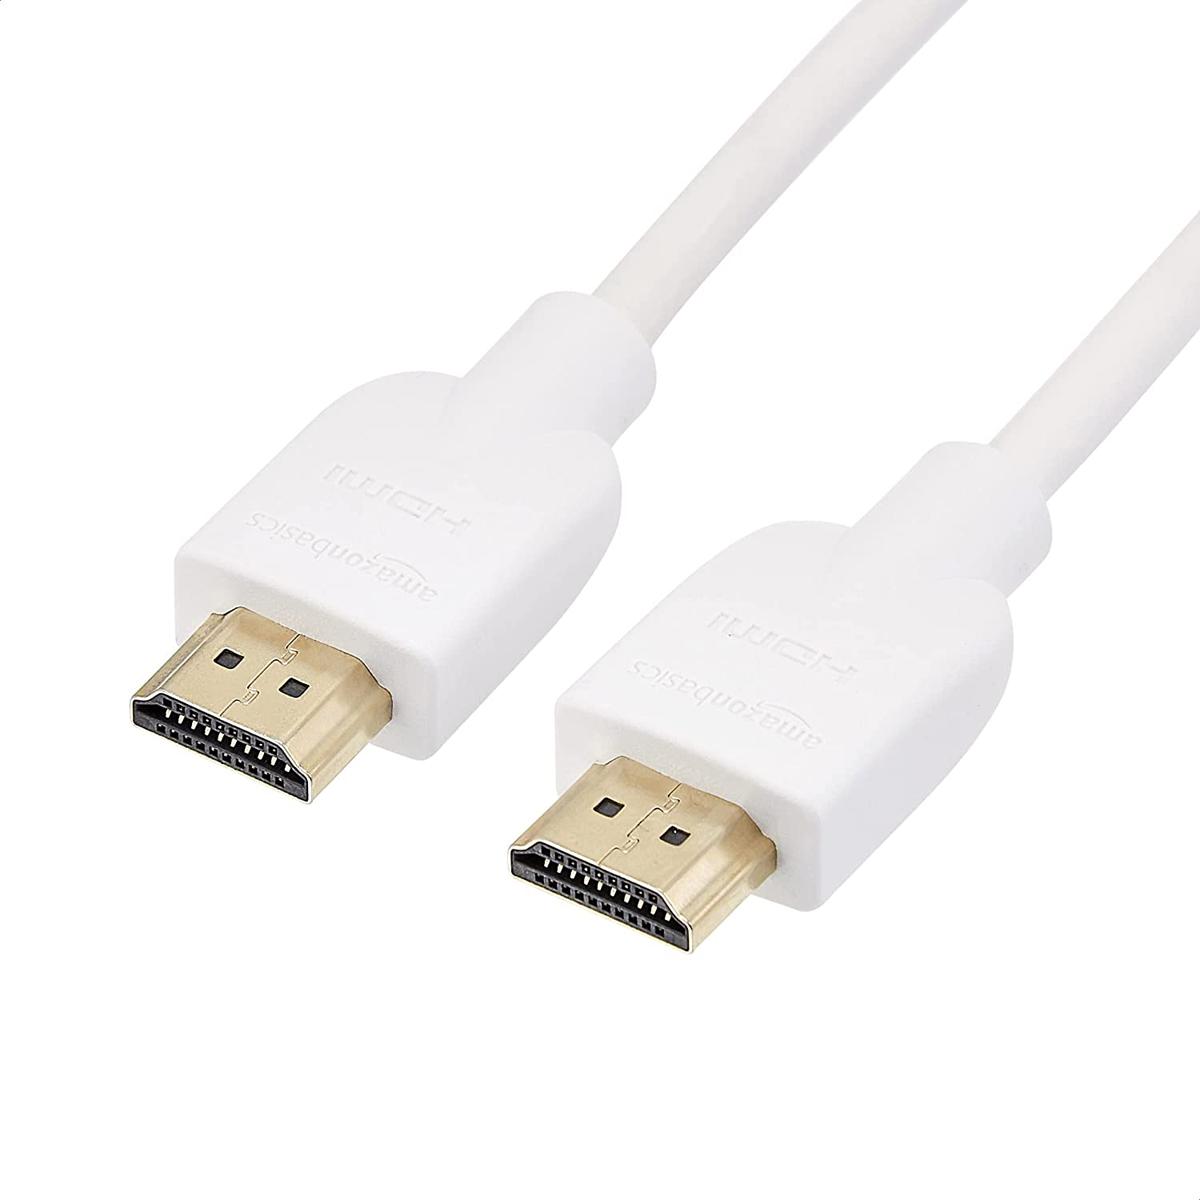 Amazon Basics CL3 Rated High-Speed HDMI Cable for $1.60